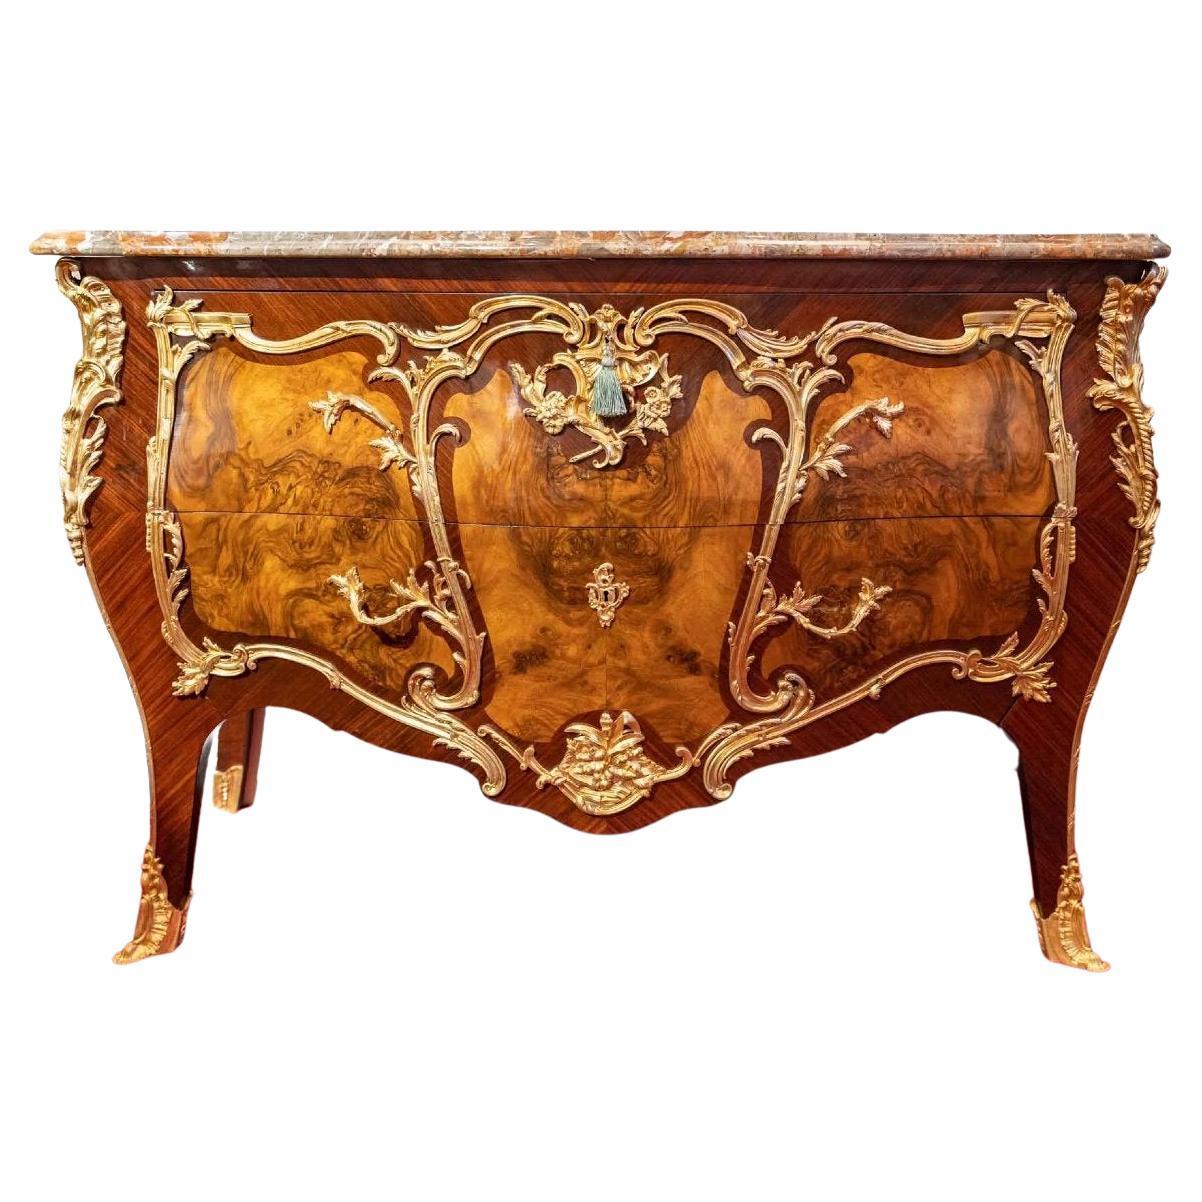 Louis XV style chest of drawers with elm wood veneer and gilt bronze ornaments
Veined Breche marble top
In perfect condition
Measures: H: 95 cm, W: 147 cm, D: 64 cm.